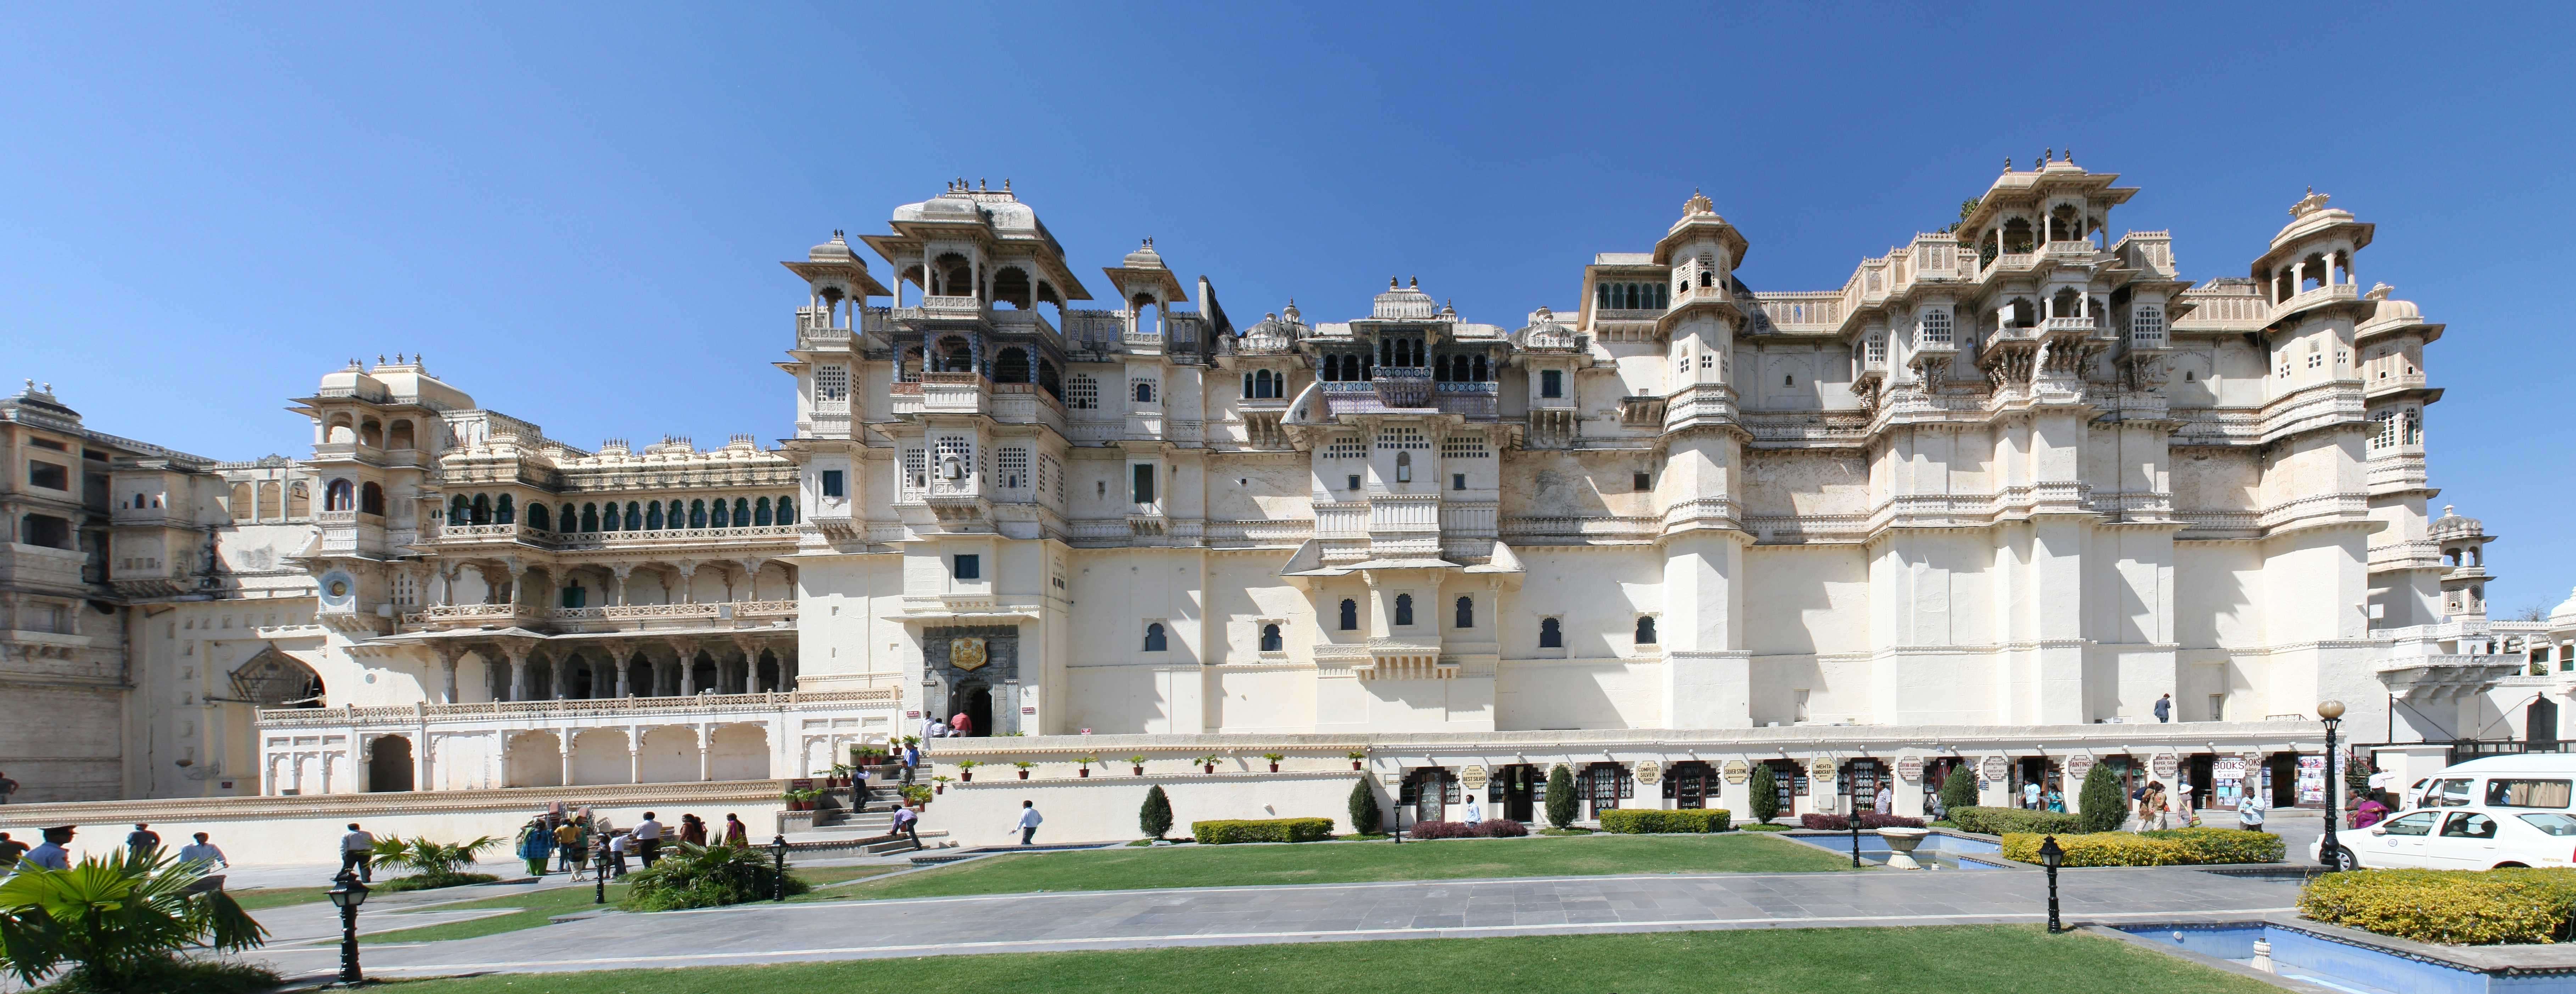 Udaipur Travel Guide: Places to See, Weather, Activity | IndiaTravelPage